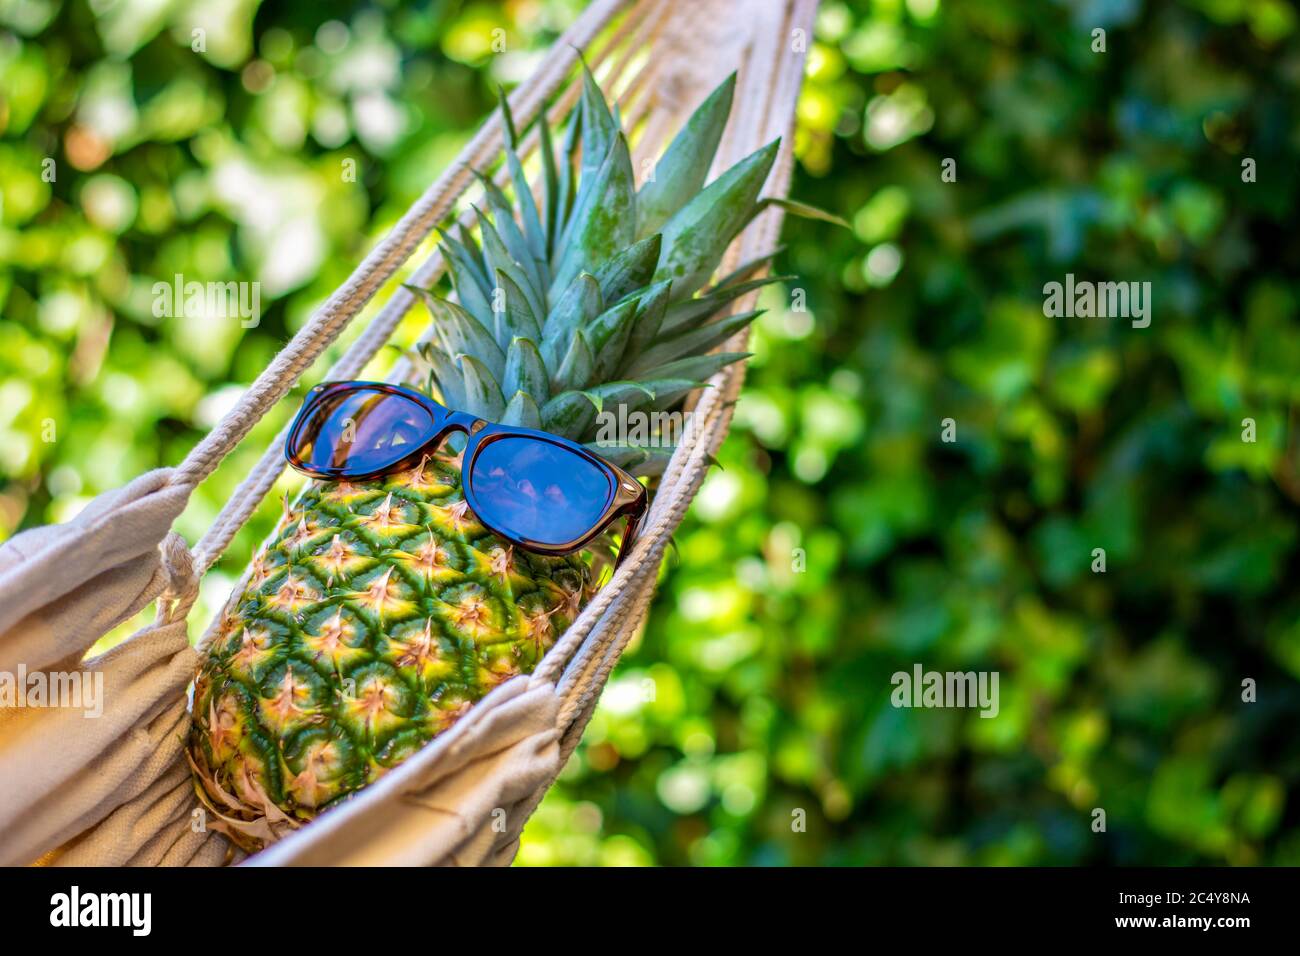 Pineapple with sunglasses relaxing in hammock. Concept of leisure, summer vibes and vacation. Green leaves vegetation foliage in background Stock Photo